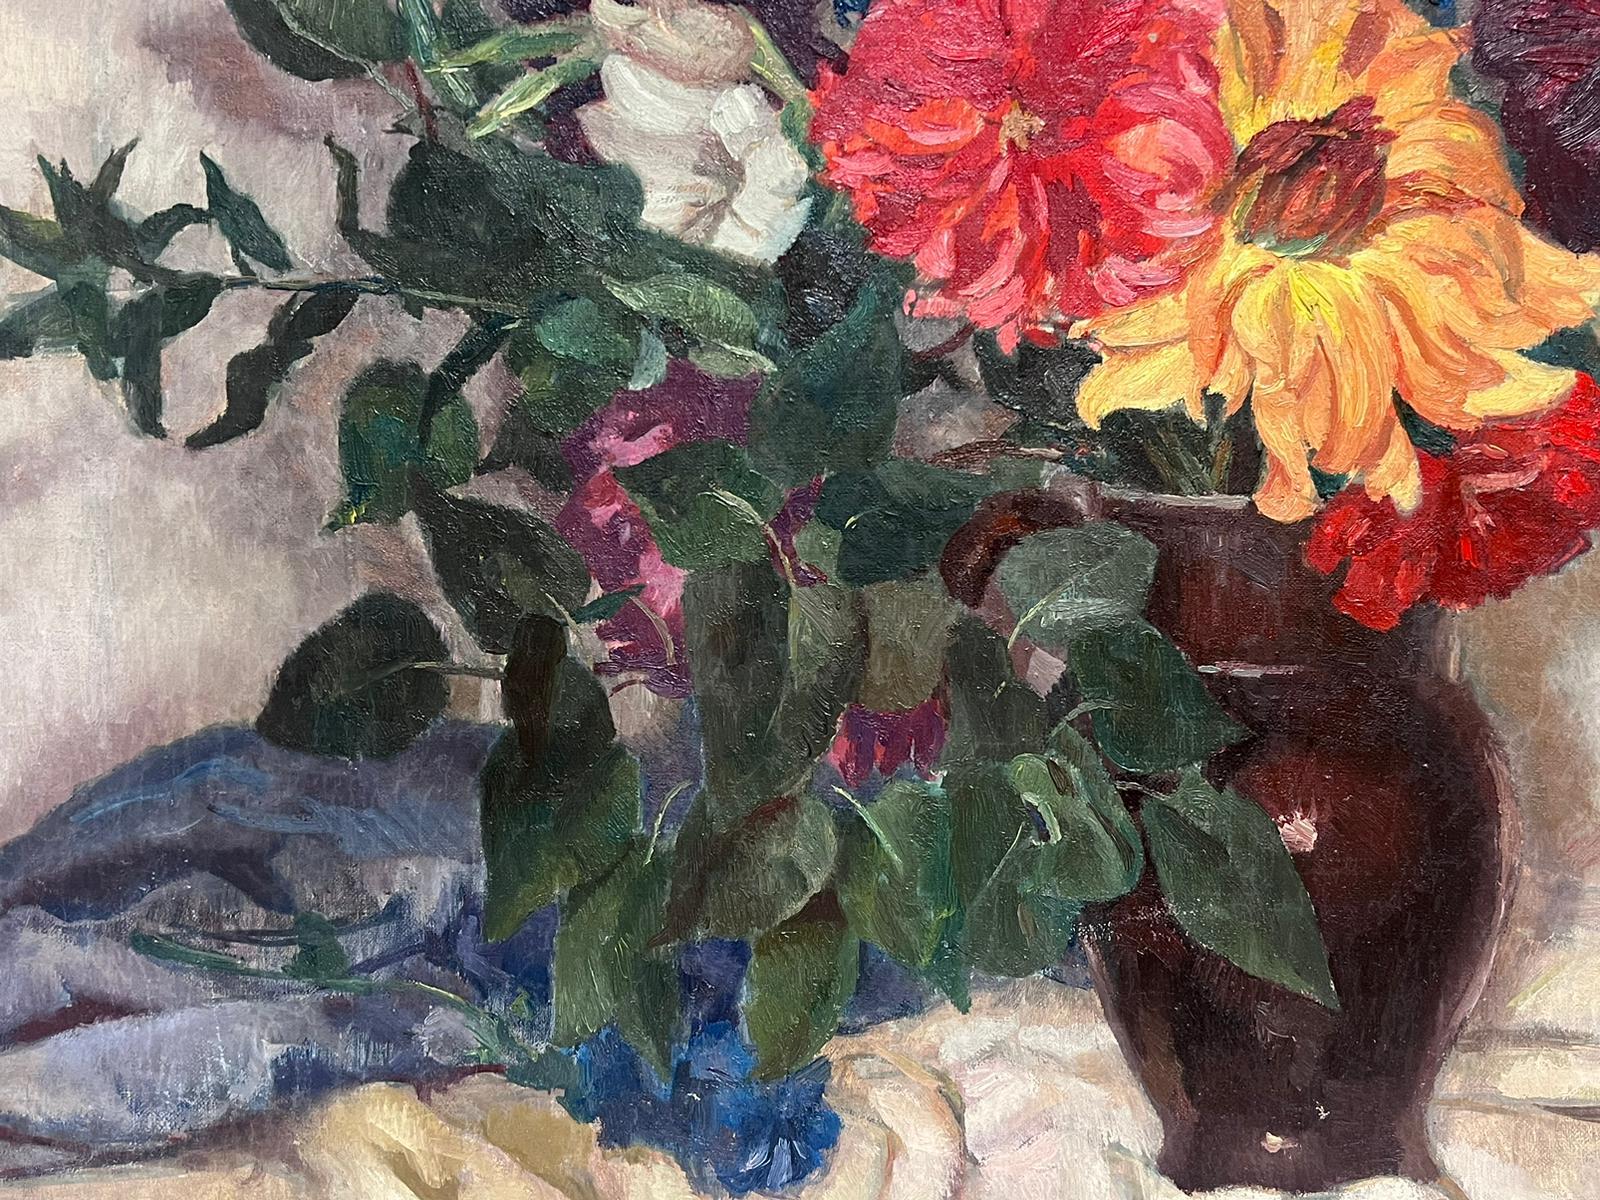 Floral Still Life
French Impressionist, circa 1930's
by Lucien Martial, signed 
oil on canvas, unframed
canvas: 24 x 32 inches
provenance: private collection, France
condition: very good and sound condition